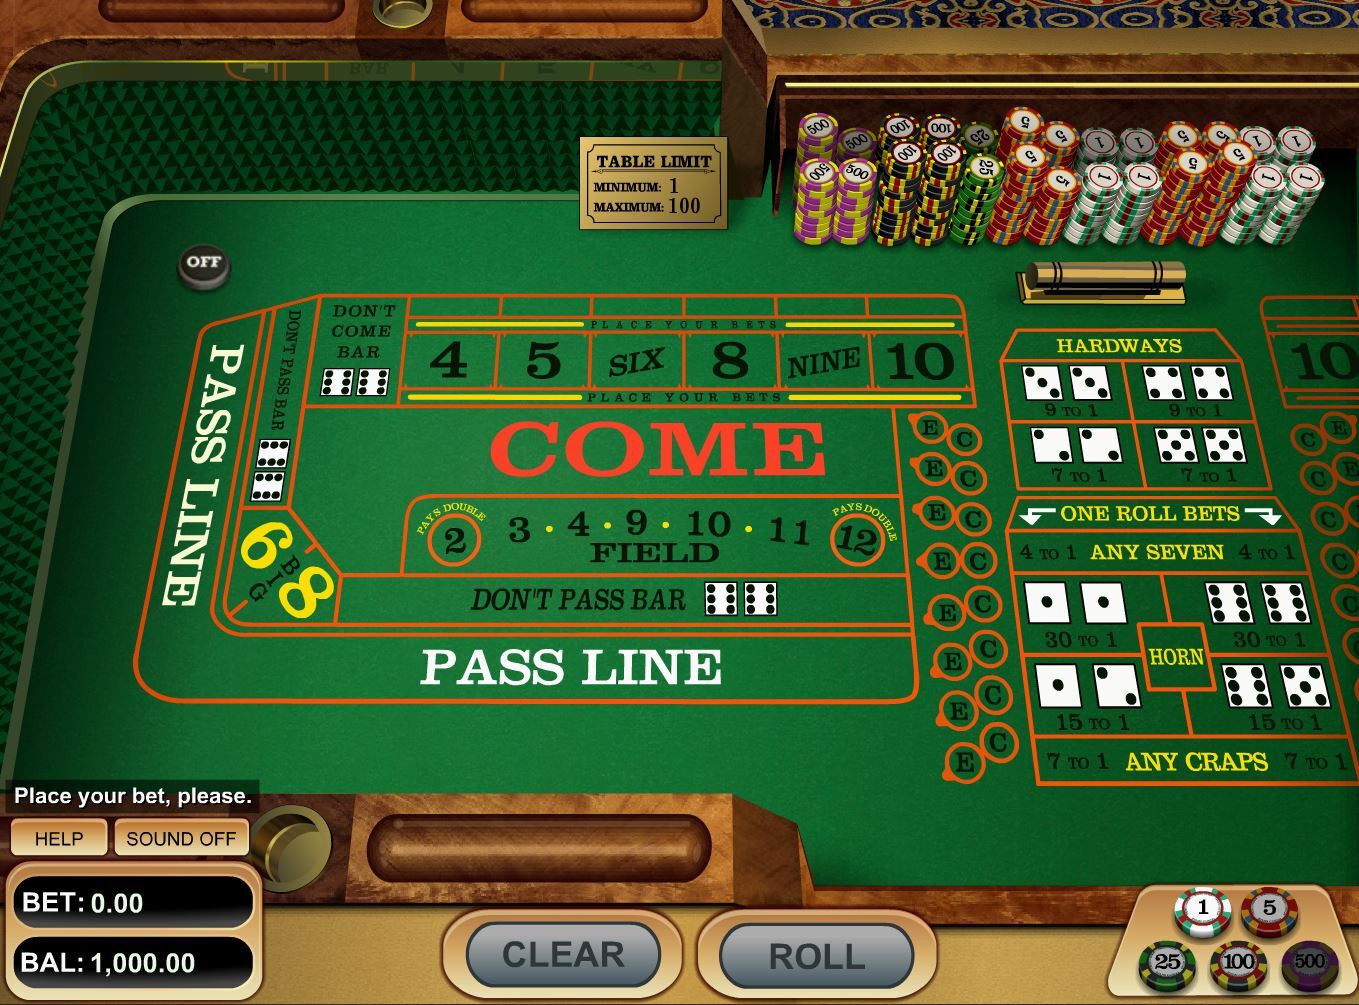 Play Craps Games for Free  Full List at